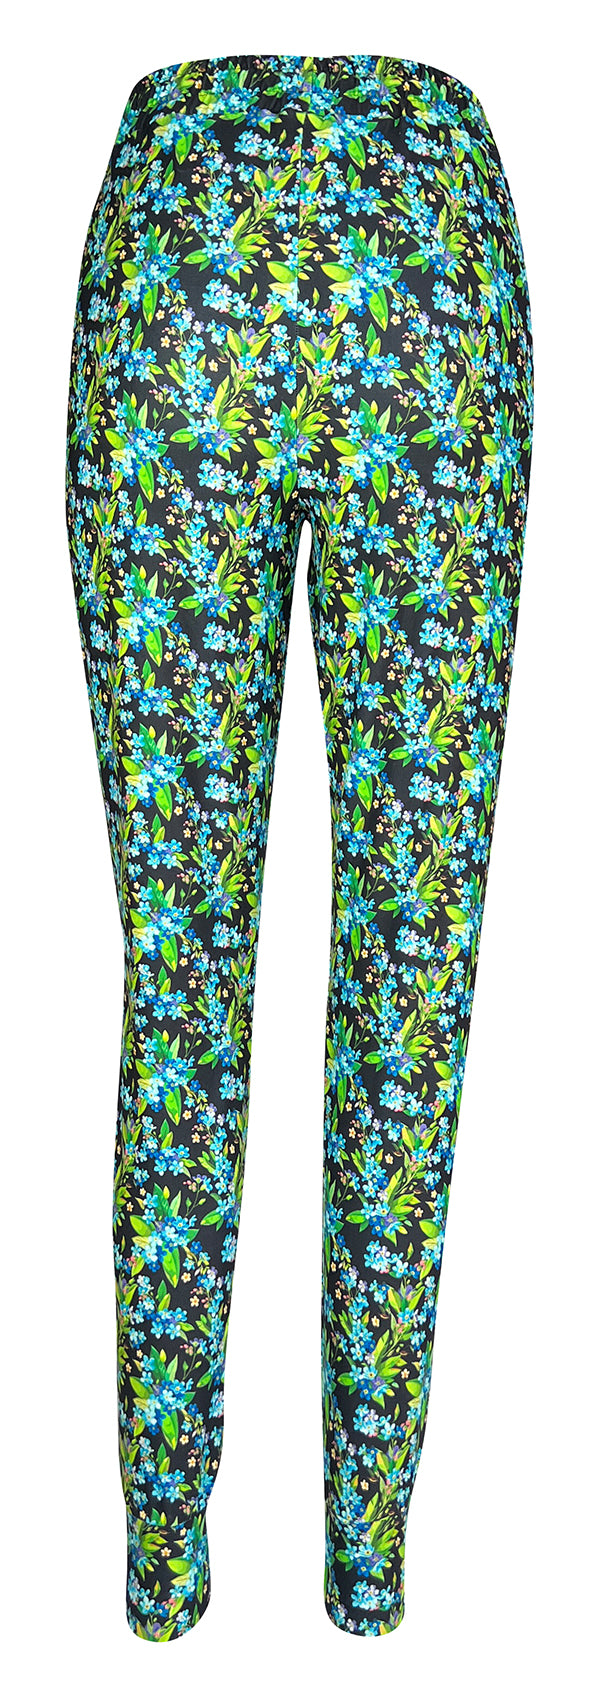 Forget Me Not Lejoggers-Joggers